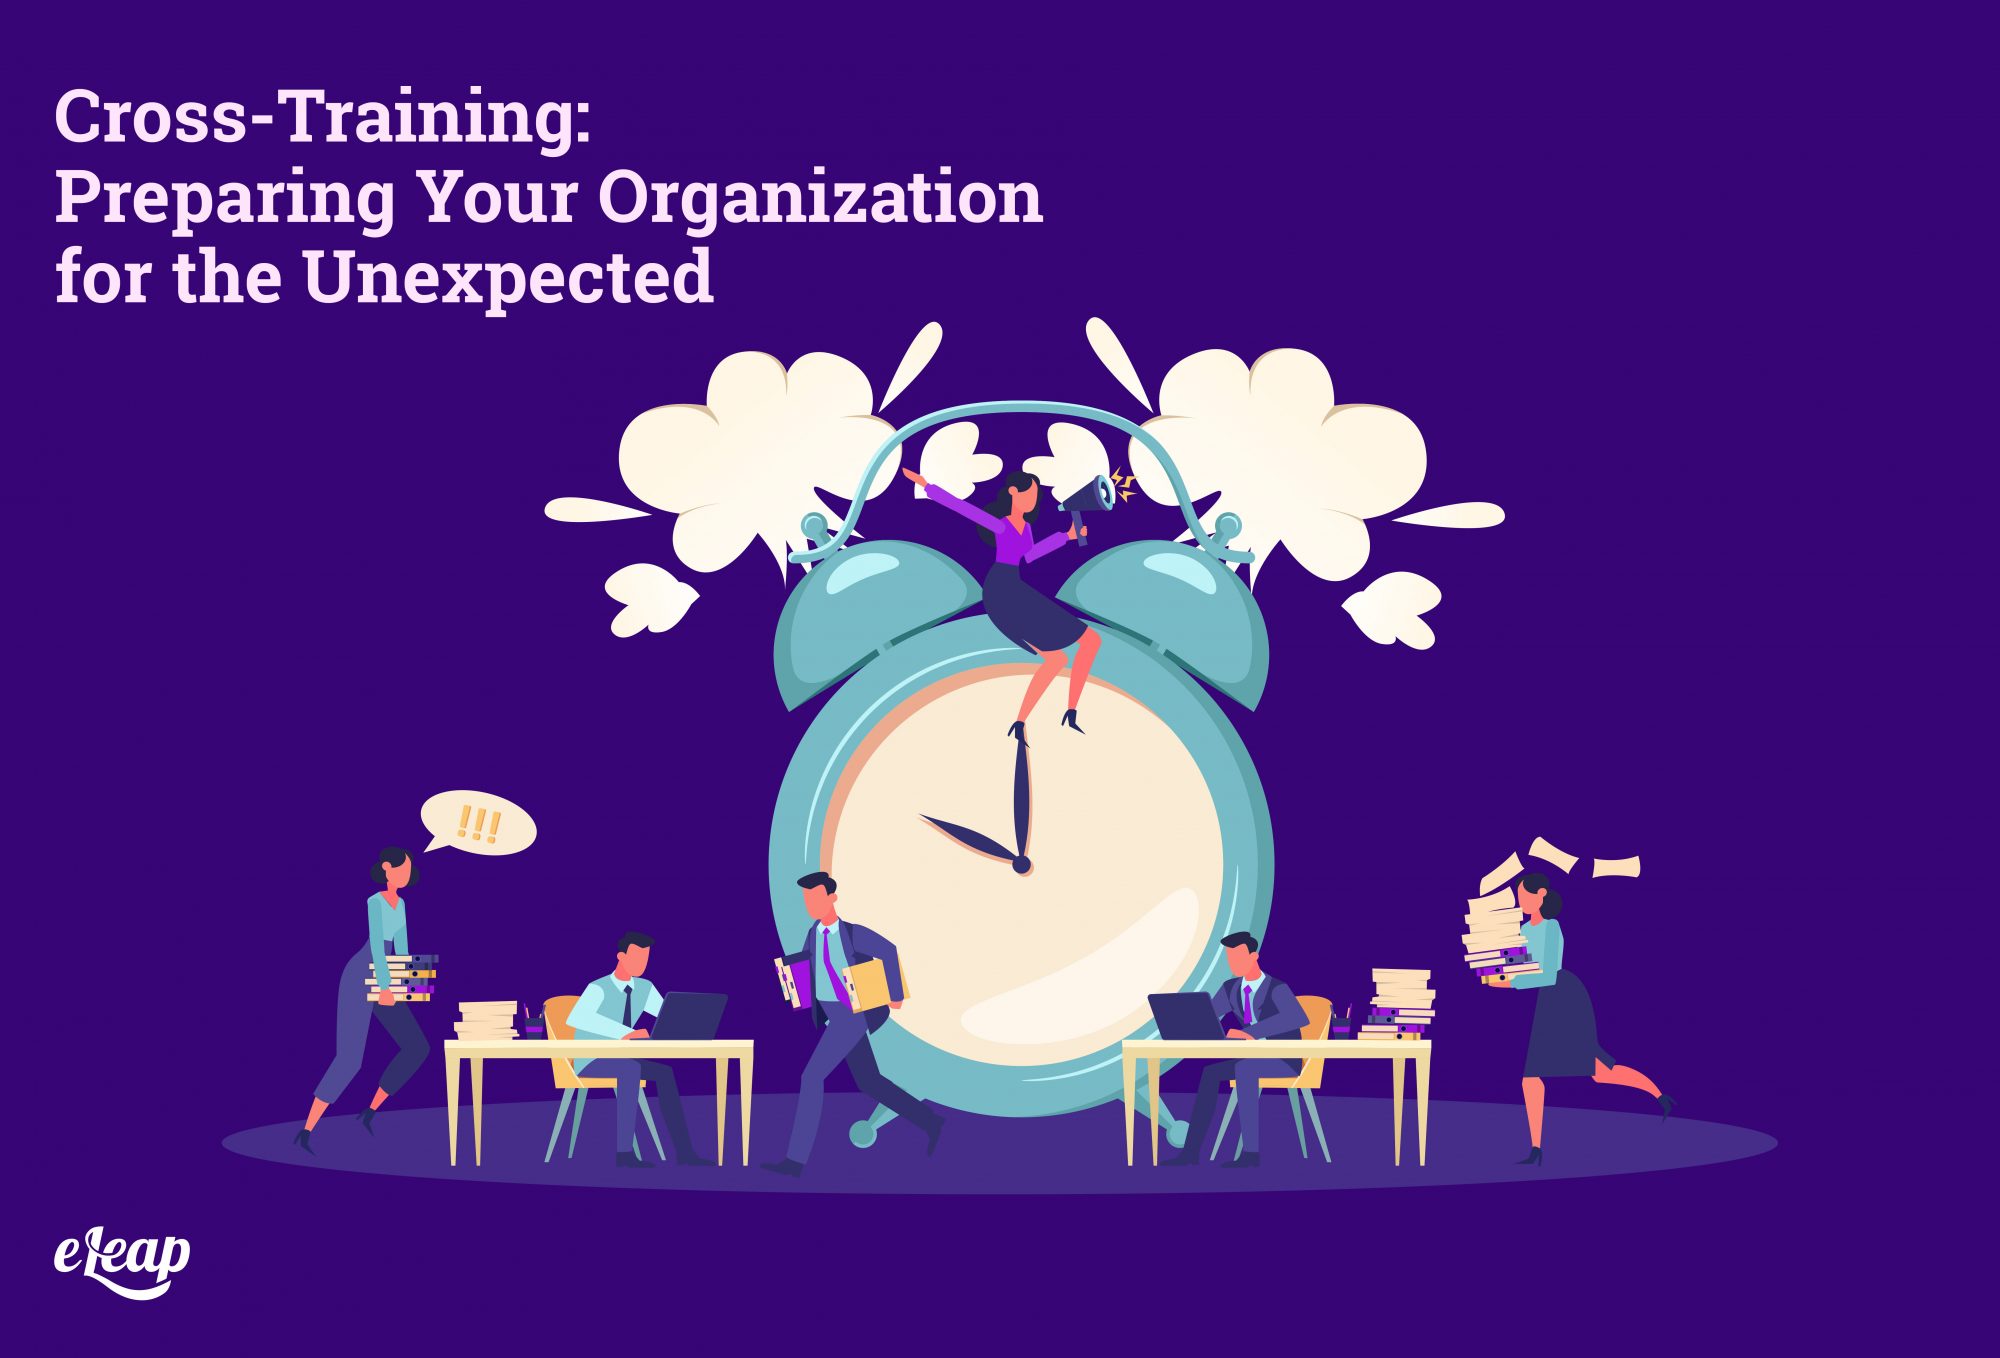 Cross-Training: Preparing Your Organization for the Unexpected